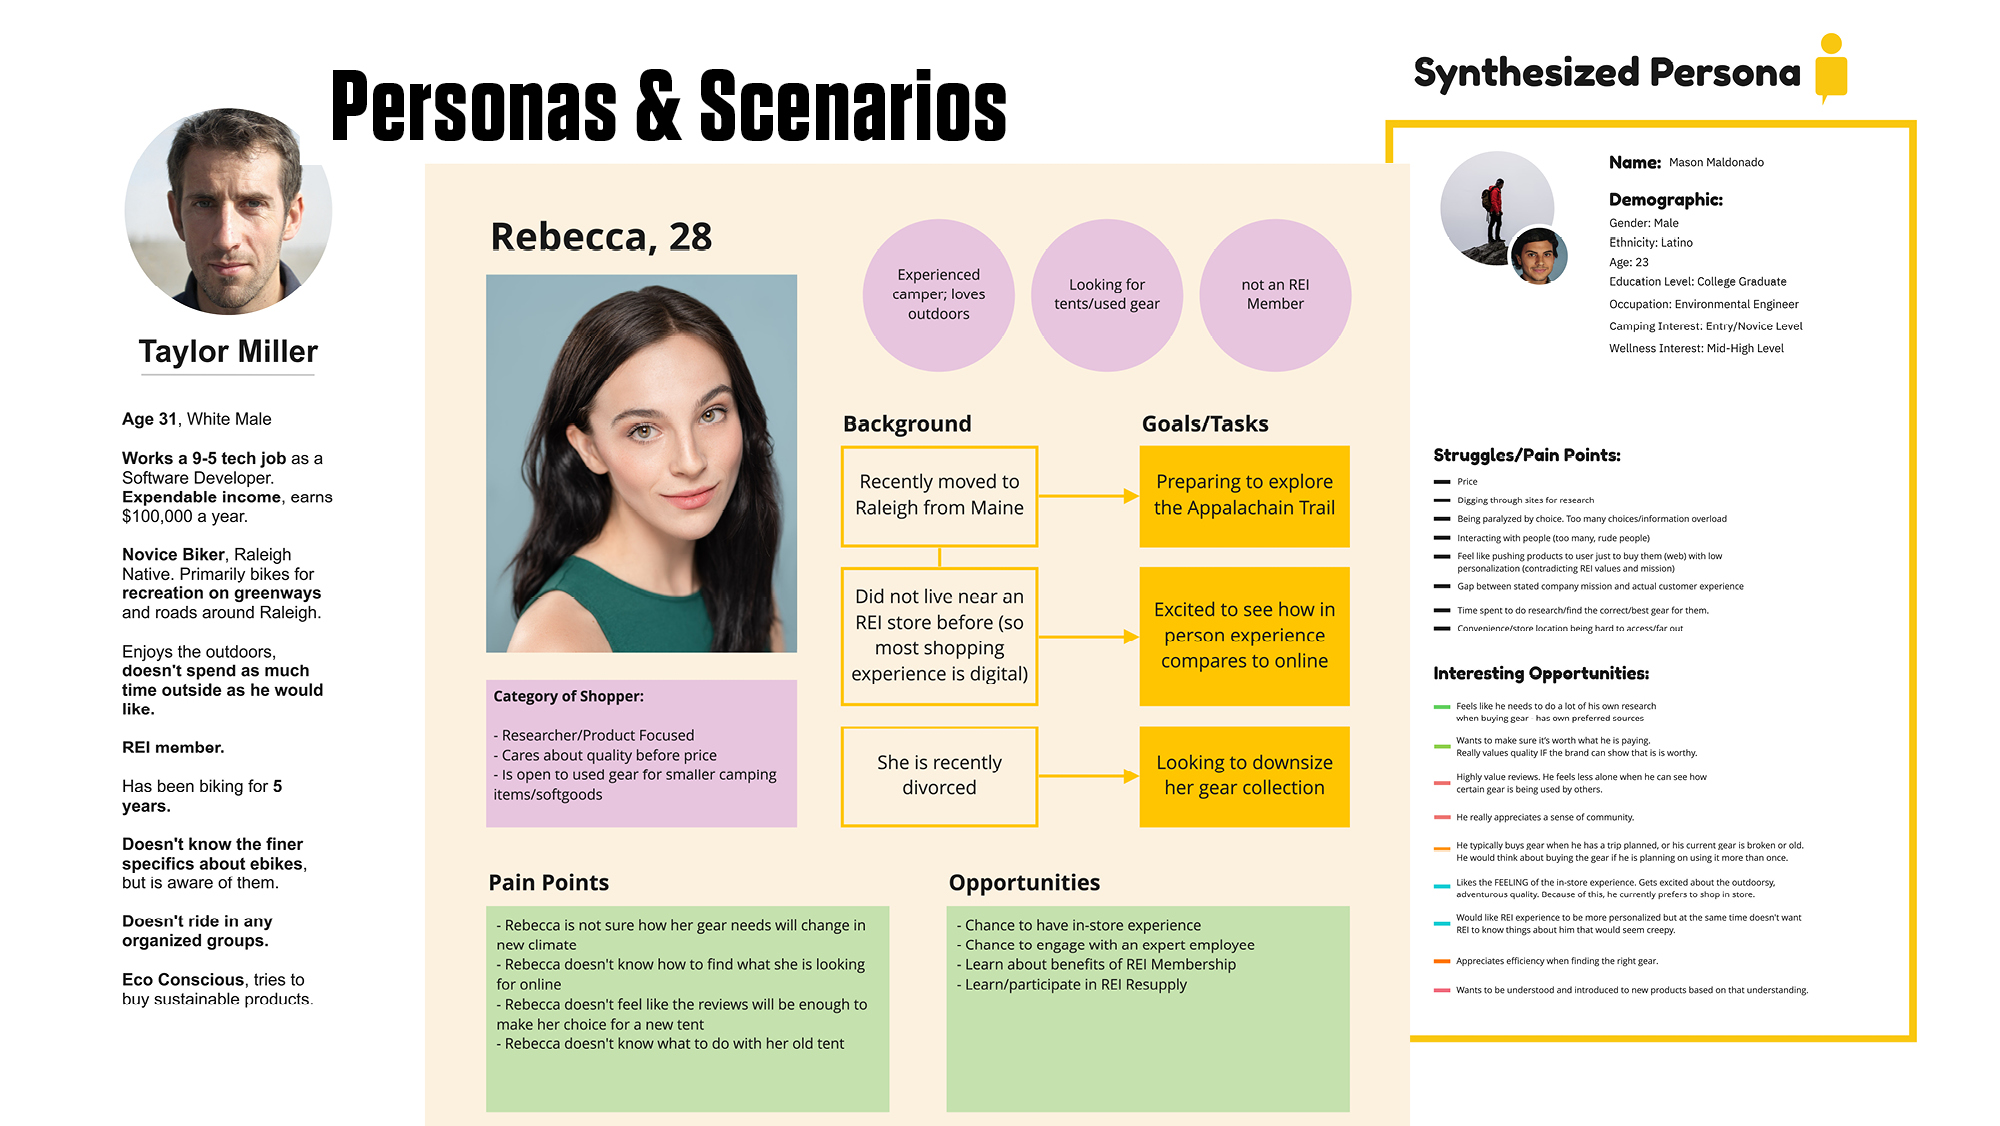 Diagrams of various personas which include an image of a person and relevant details of their needs and desires related to the use cases